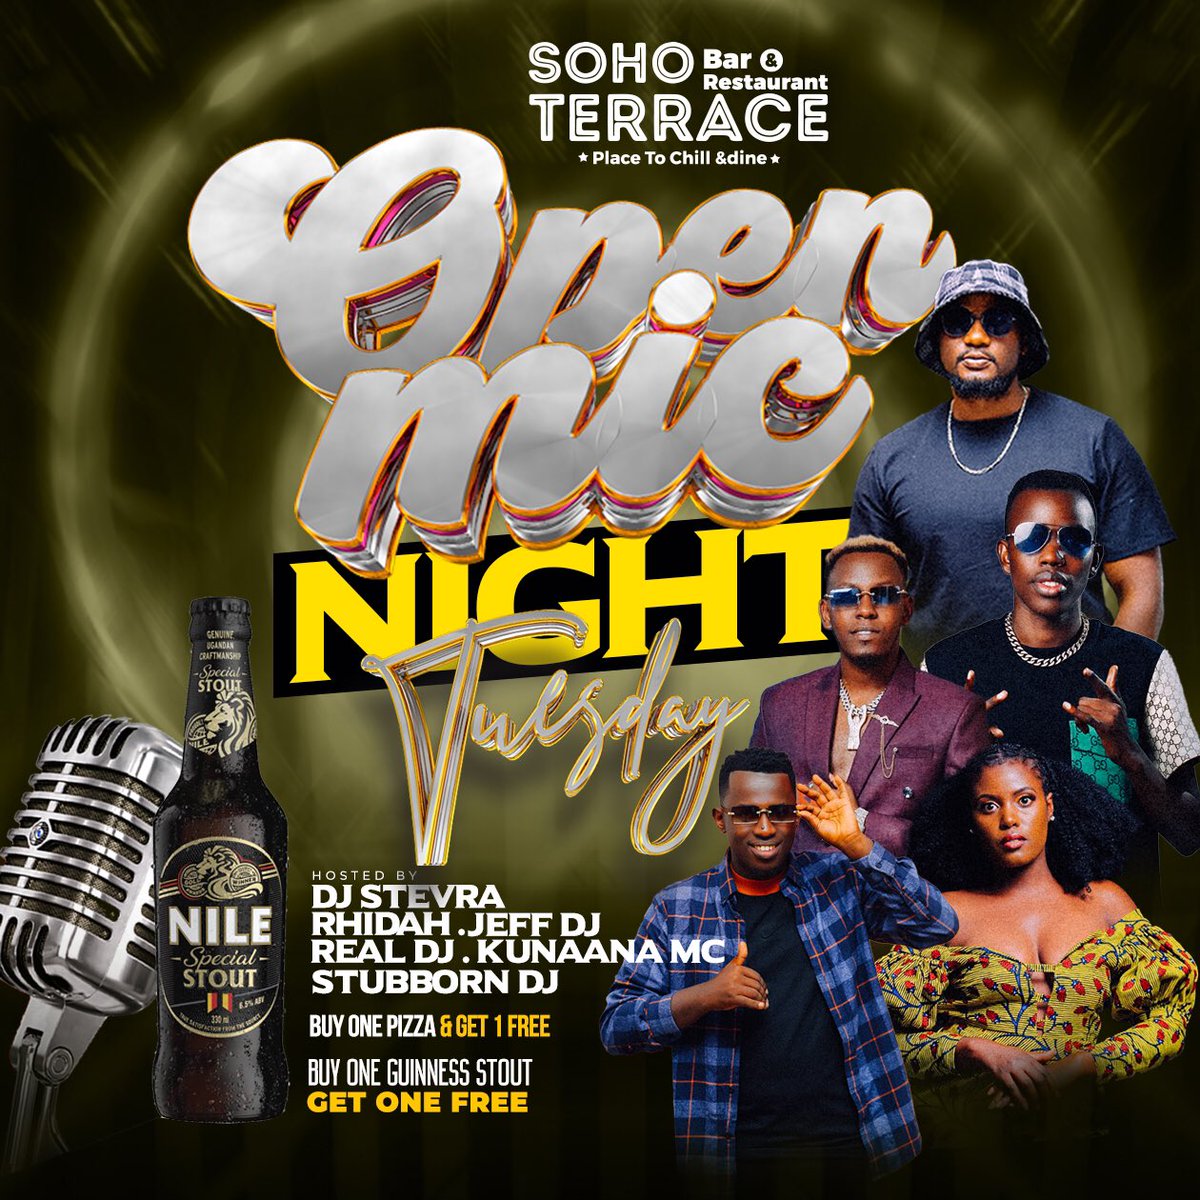 We singing our favorite songs tonyt 🥳🥳🔥🔥🔥🎉🎉🎉 #openMicnight